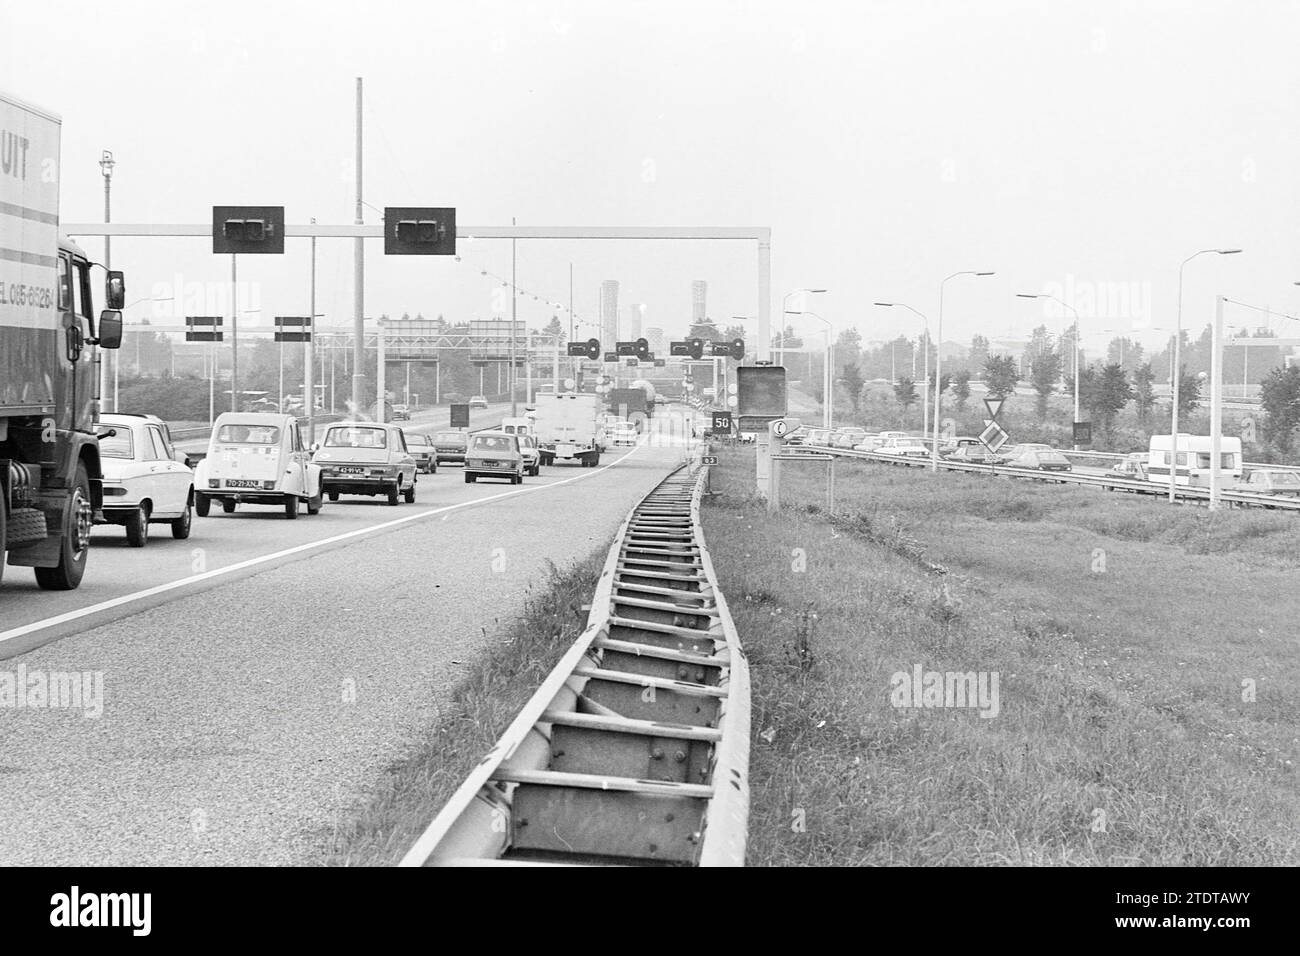 Busy Velsertunnel, Busy, Velsertunnel, 23-09-1977, Whizgle News from the Past, Tailored for the Future. Explore historical narratives, Dutch The Netherlands agency image with a modern perspective, bridging the gap between yesterday's events and tomorrow's insights. A timeless journey shaping the stories that shape our future Stock Photo